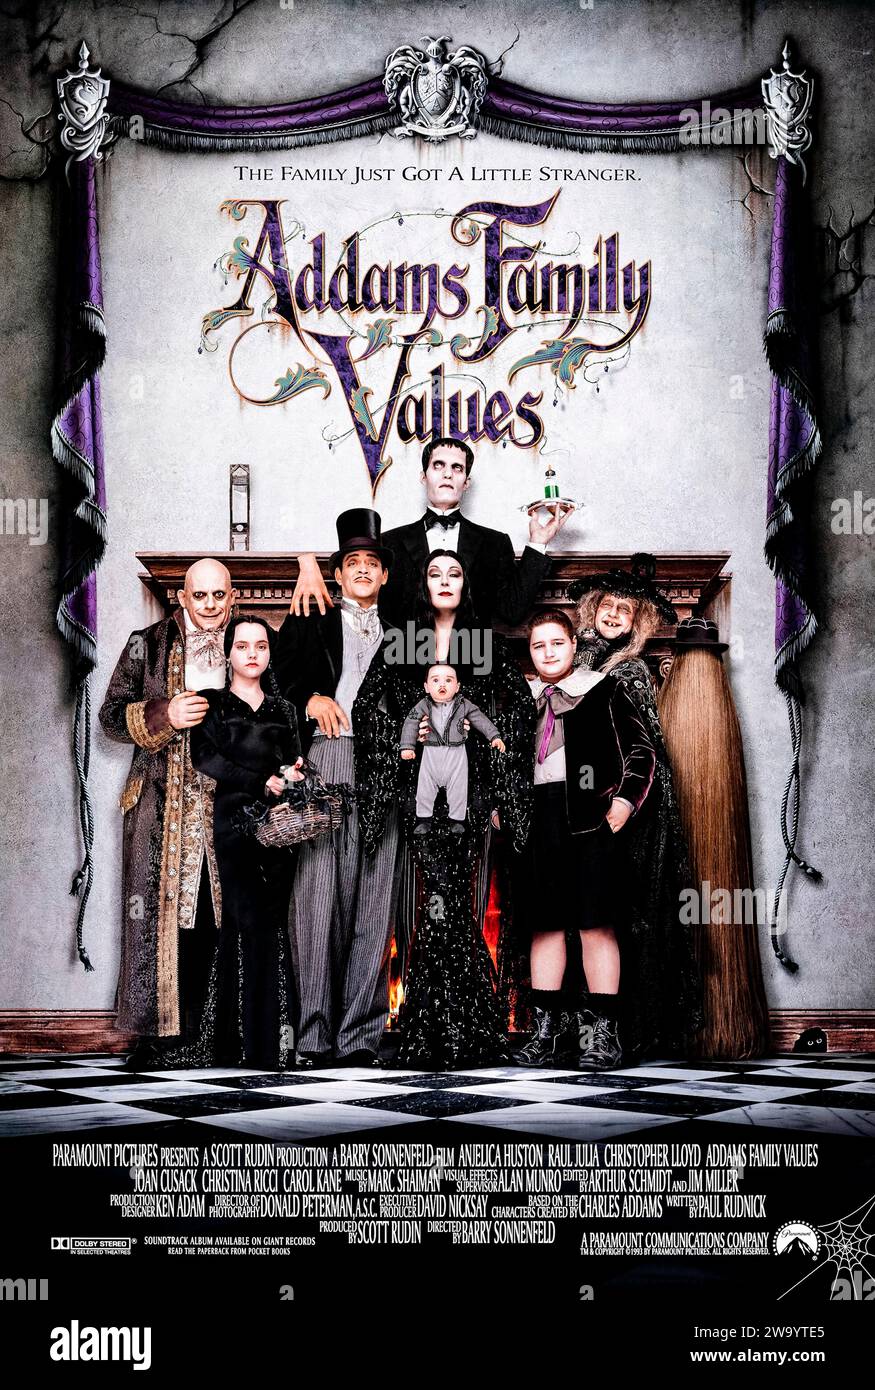 Addams Family Values (1993) directed by Barry Sonnenfeld and starring Anjelica Huston, Raul Julia and Christopher Lloyd. Charles Addams' much loved characters return in this sequel about the Addams Family trying  to rescue their beloved Uncle Fester from his gold-digging new love, a black widow named Debbie.  Photograph of an original 1993 US one sheet poster ***EDITORIAL USE ONLY***. Credit: BFA / Paramount Pictures Stock Photo